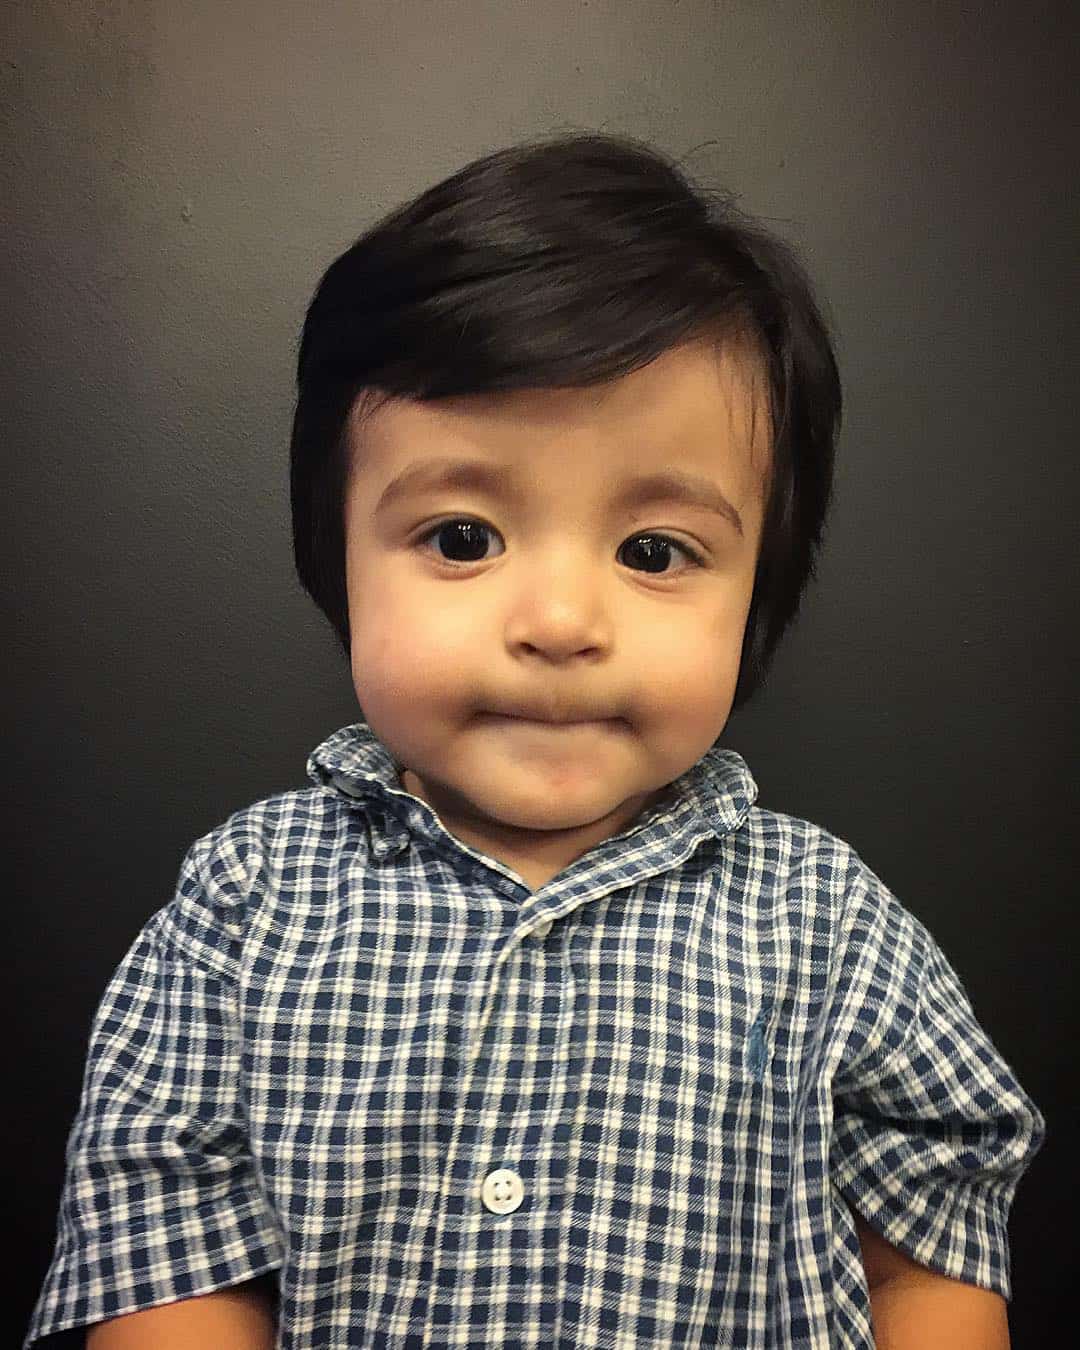 50 cute baby boy haircuts - for your lovely toddler (2019)